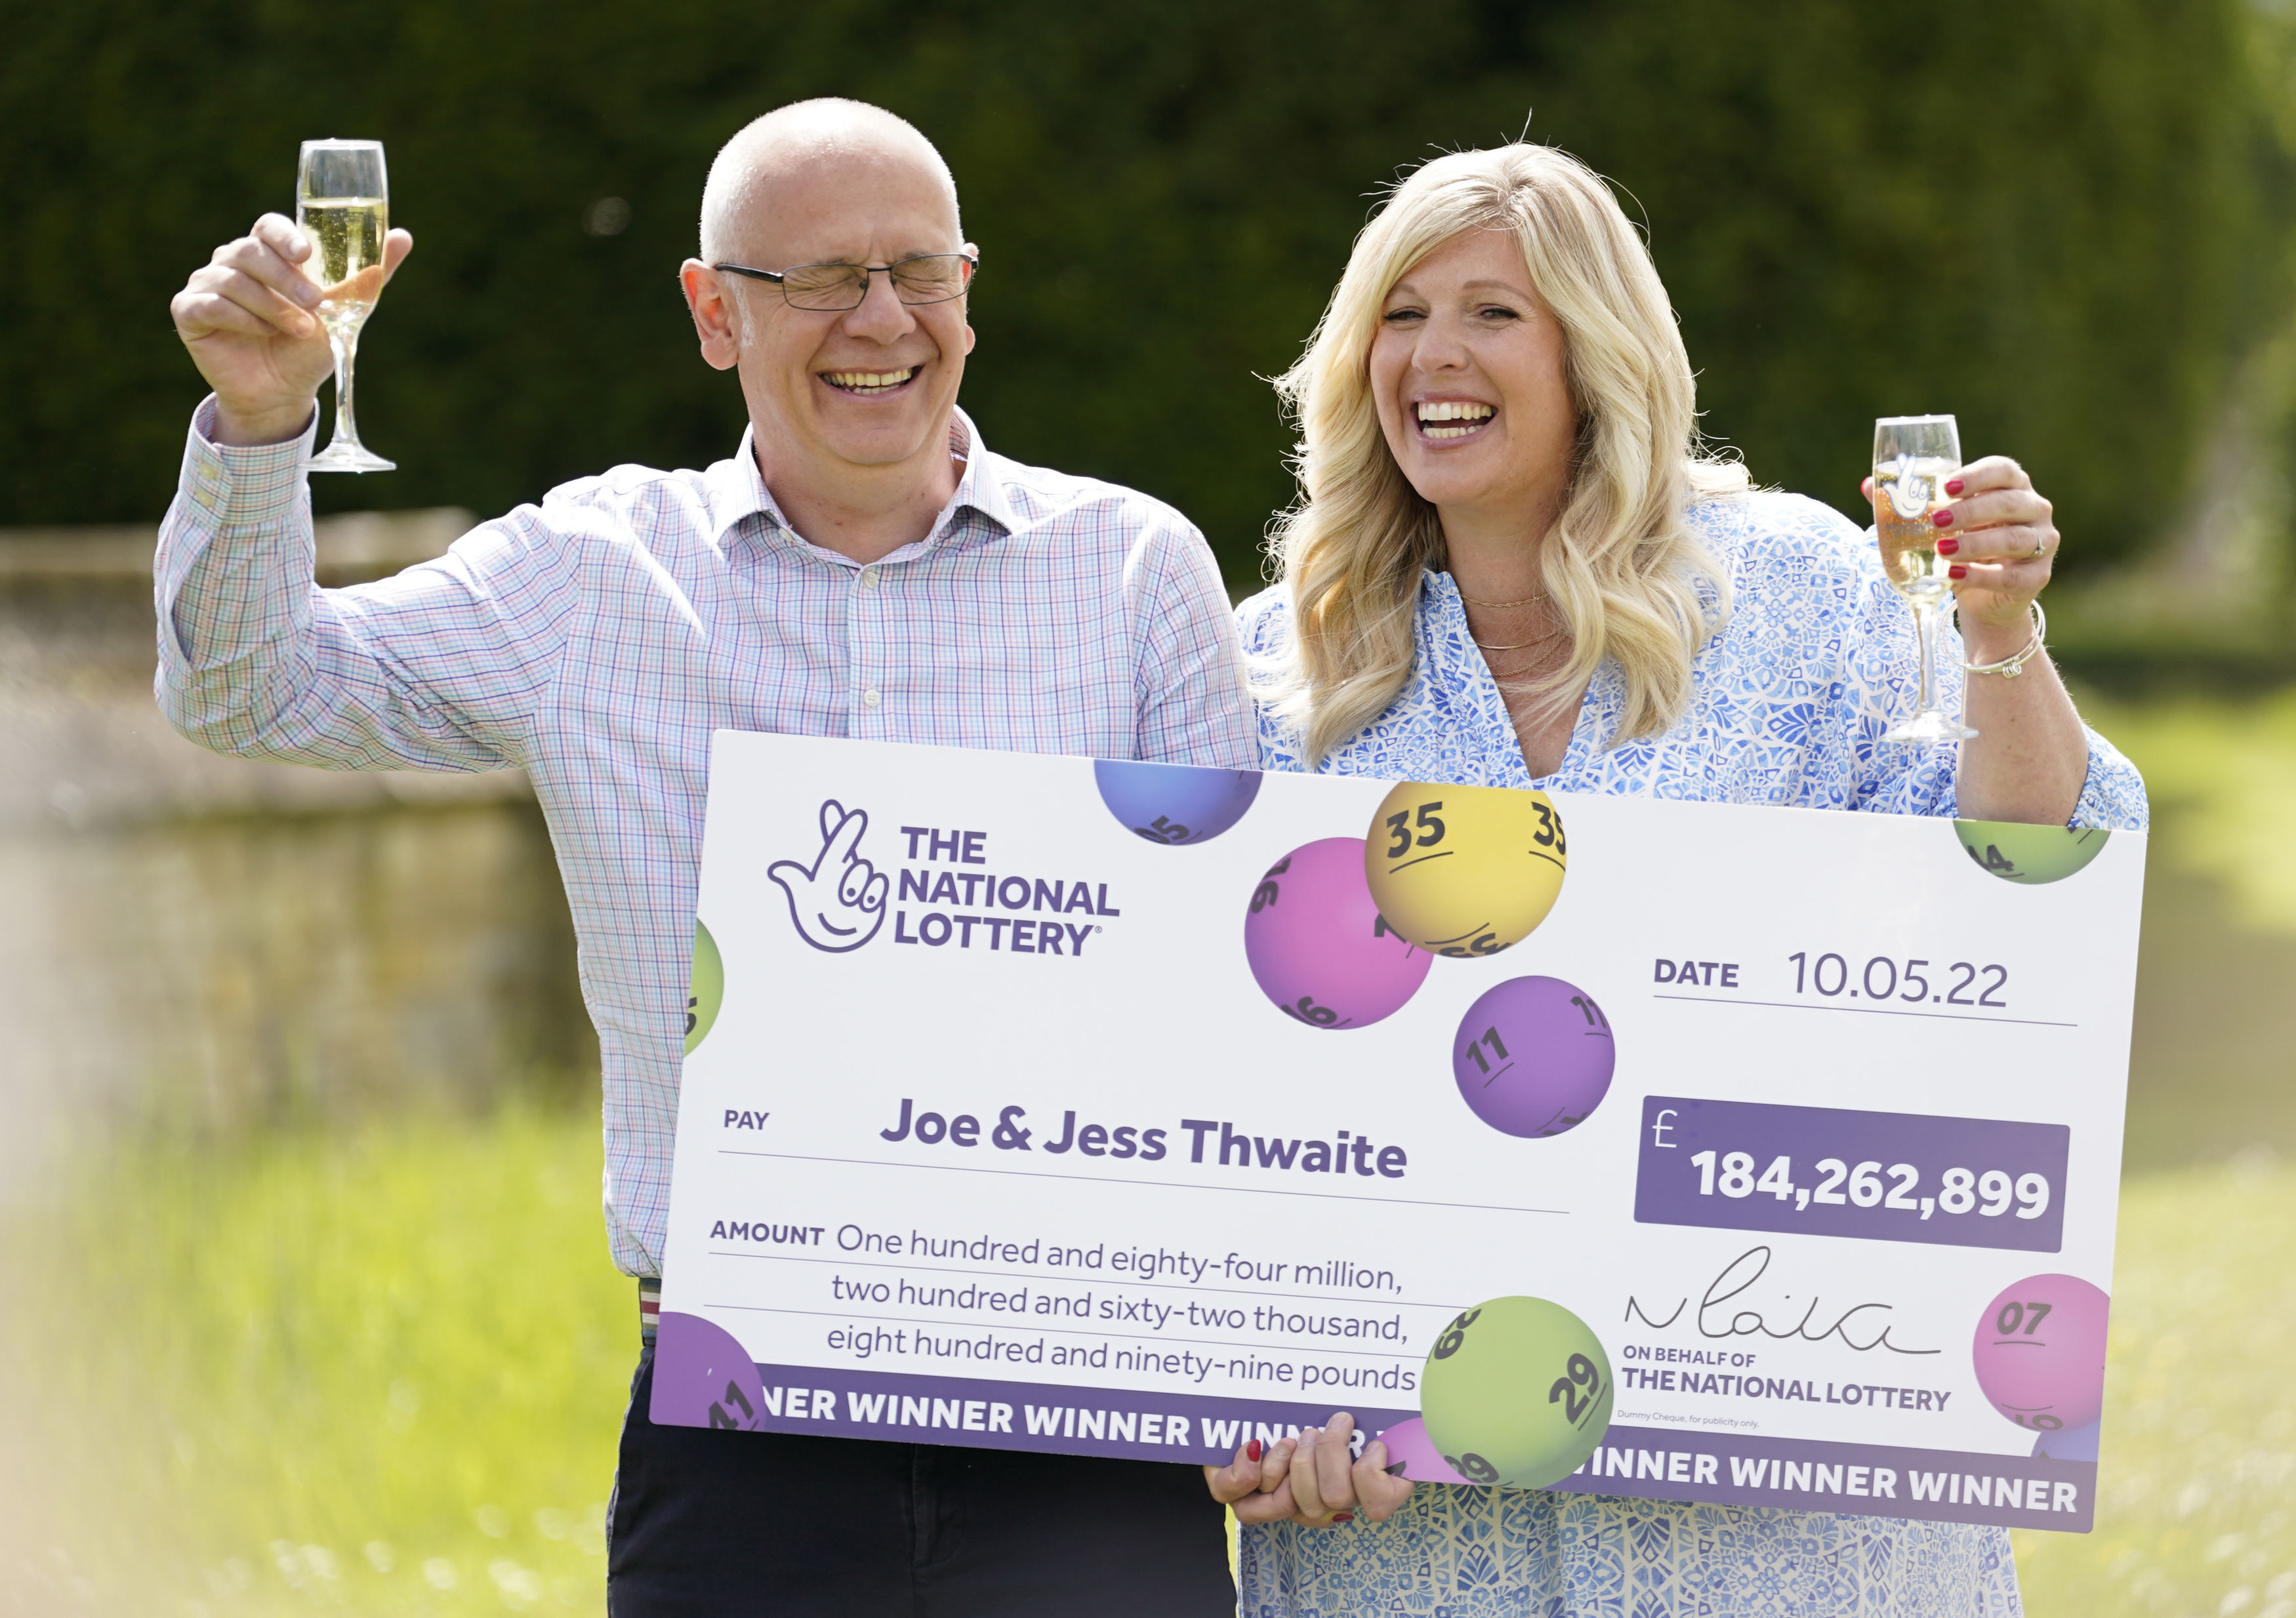 Joe and Jess Thwaite won an enormous £184m in May last year